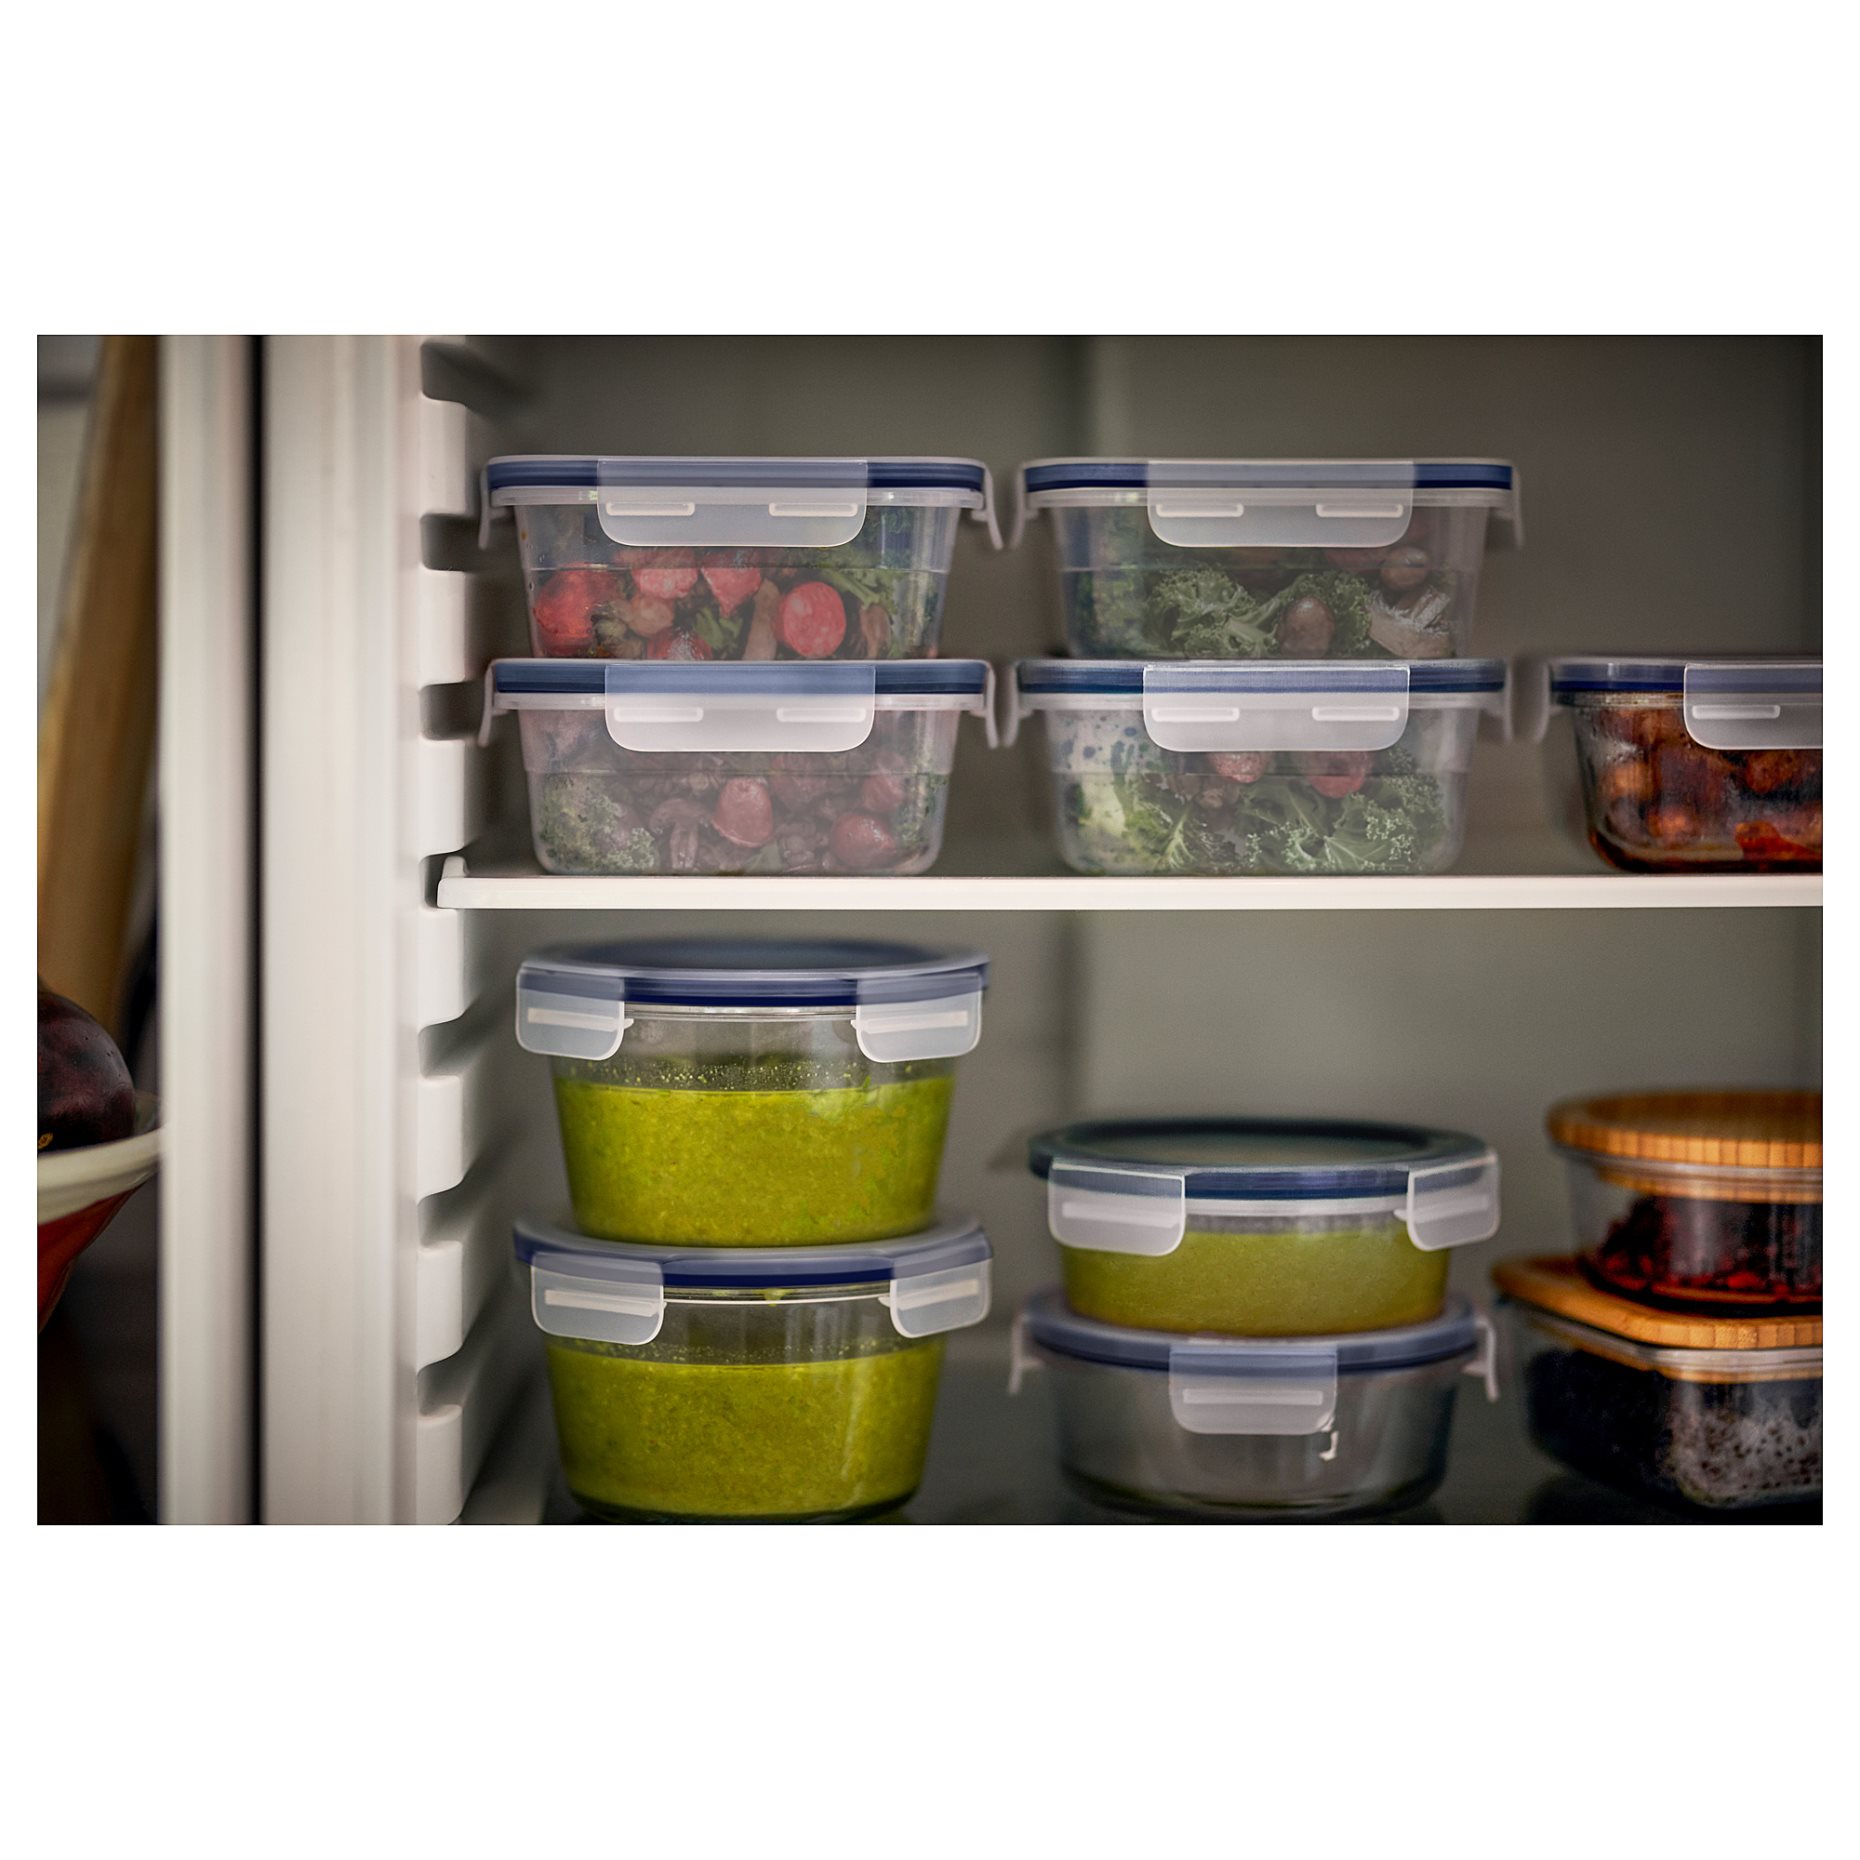 IKEA 365+, food container with lid, 392.691.01